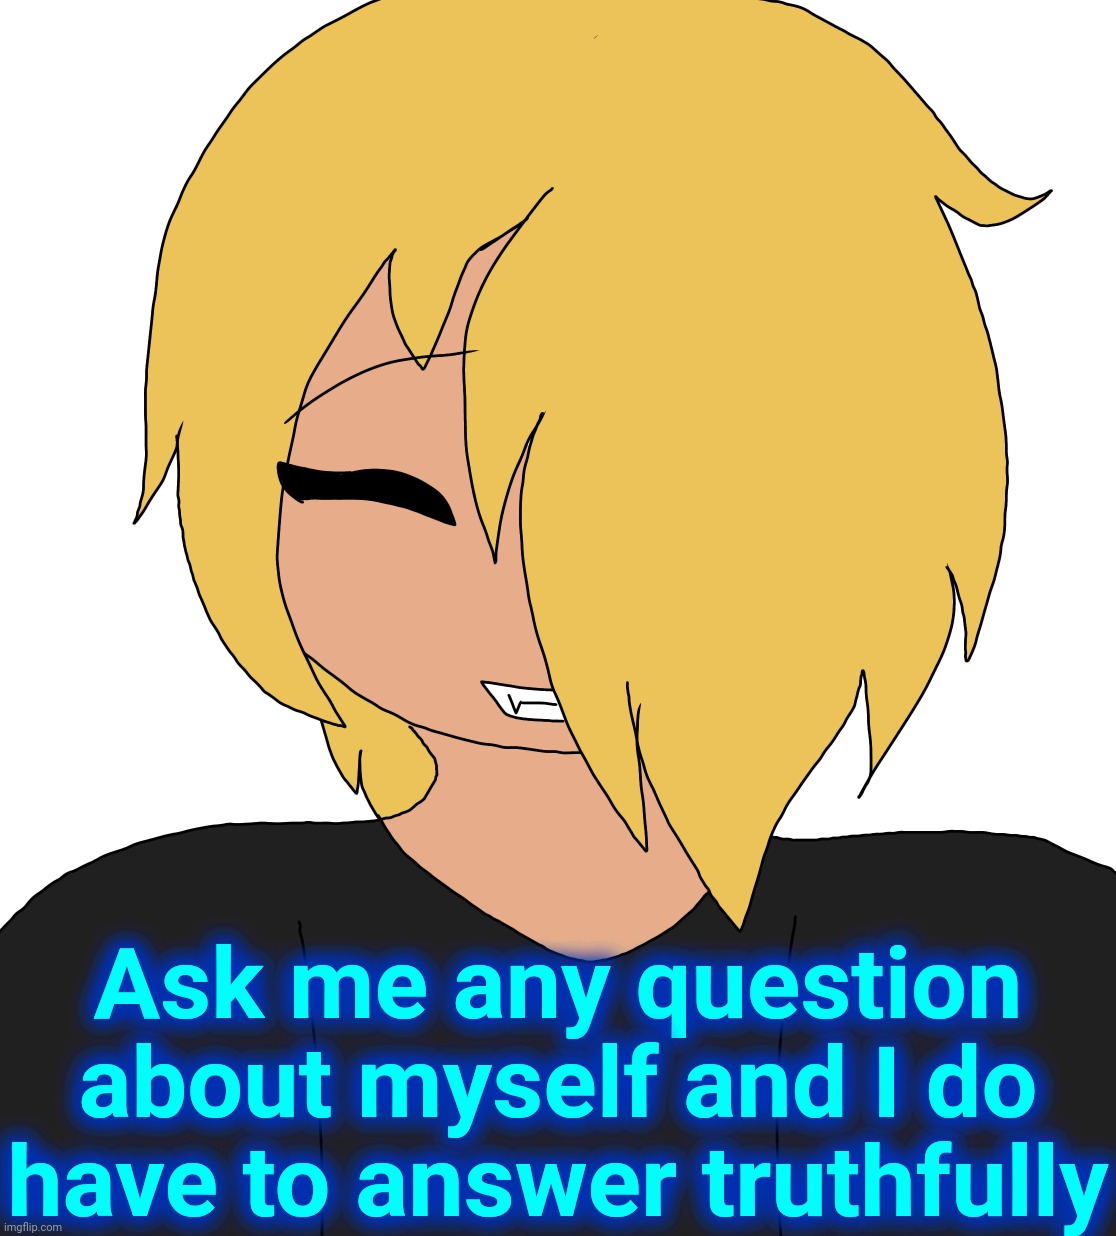 Spire smiling | Ask me any question about myself and I do have to answer truthfully | image tagged in spire smiling | made w/ Imgflip meme maker